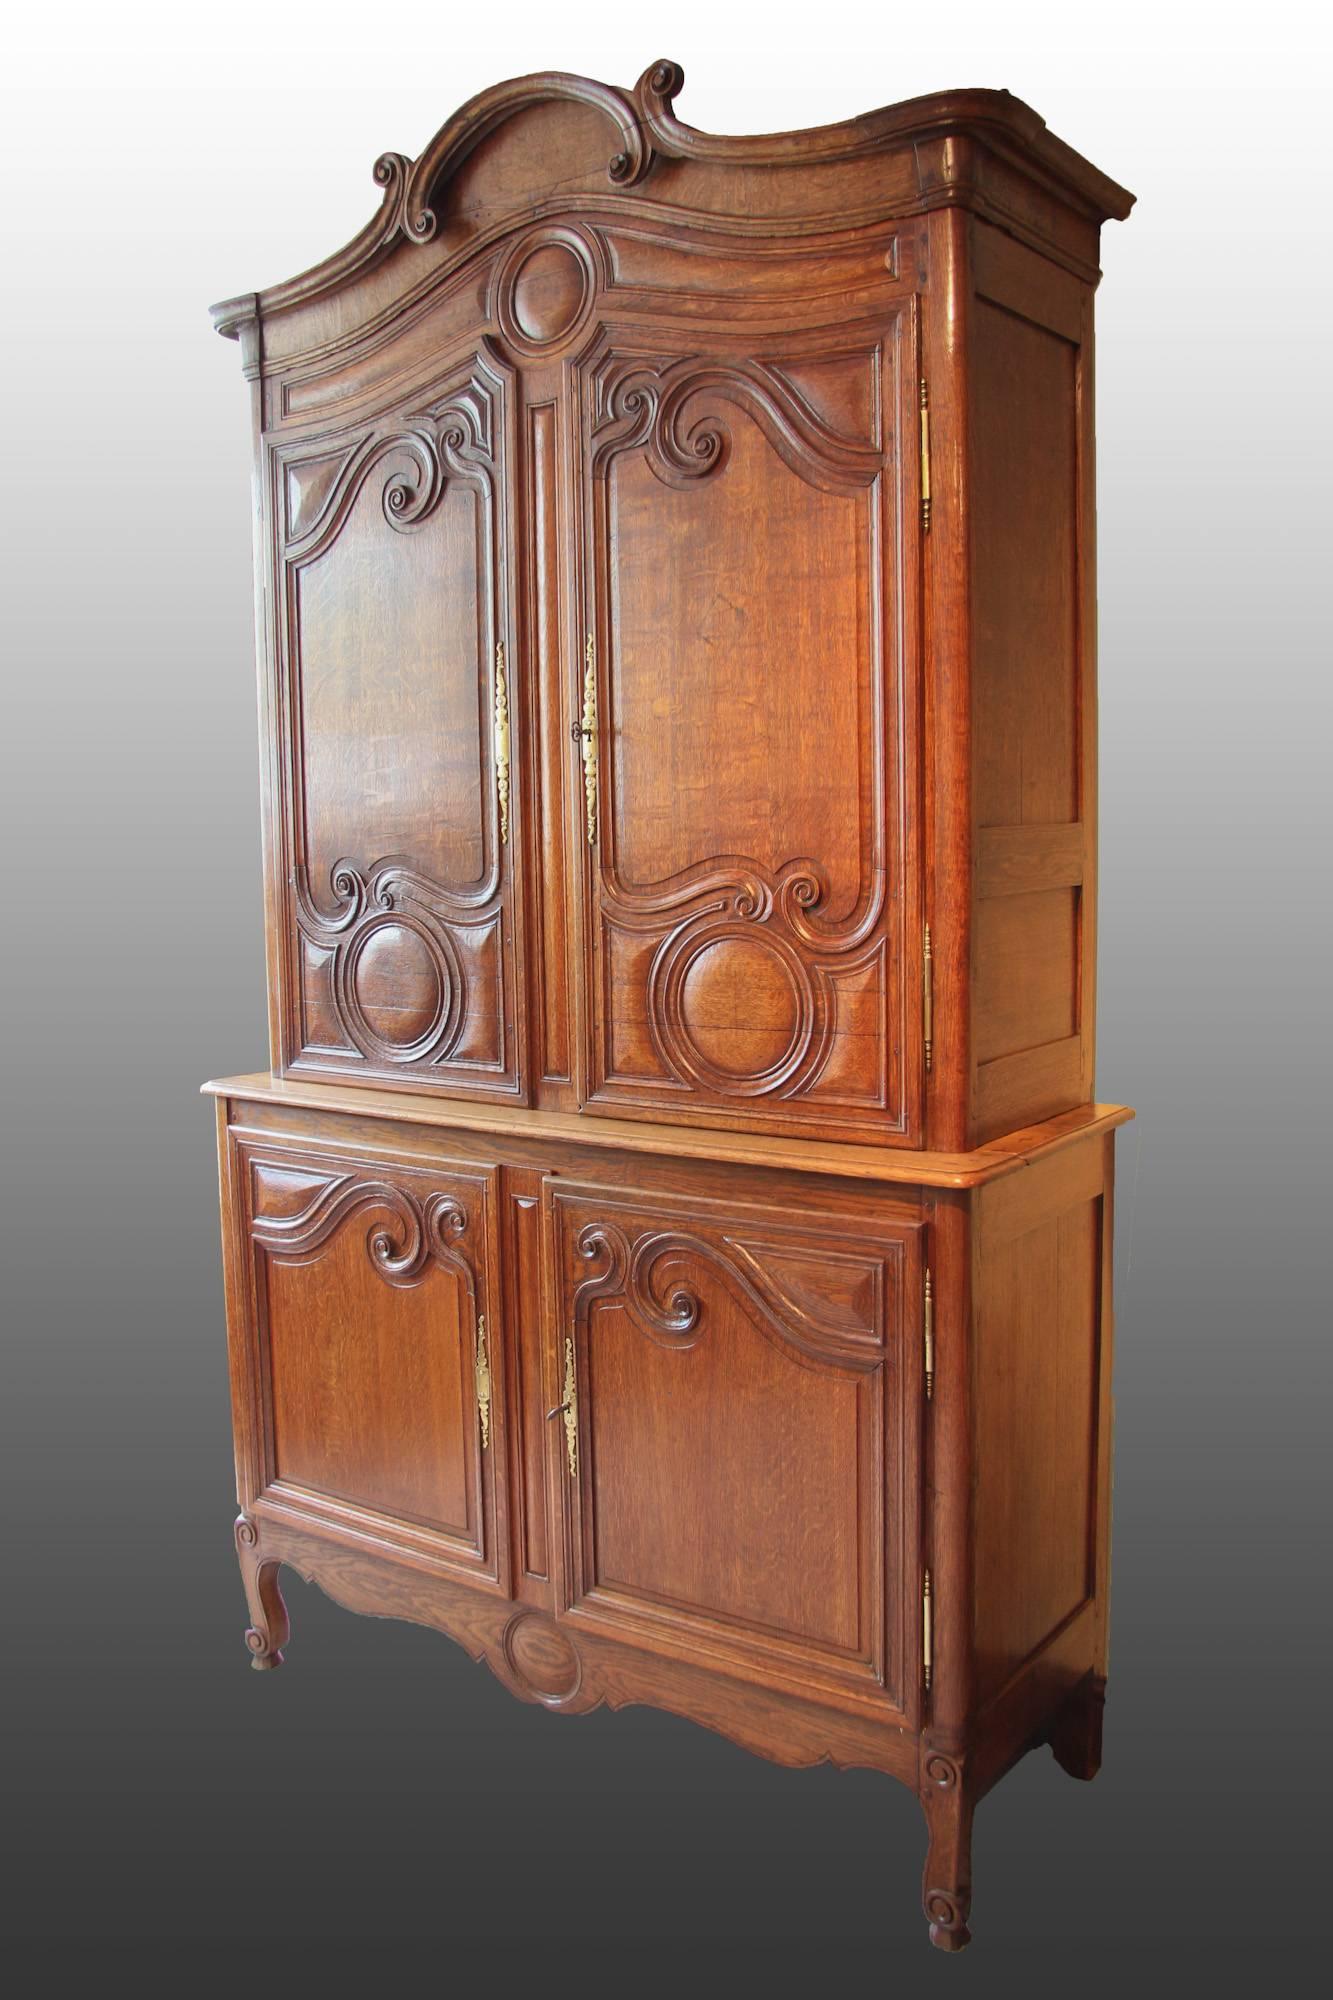 Magnificent French oak "Buffet en Deux Corps" from Normandy. Lovely original condition, with arched 'Chapeau Du Gendarme' cornice. Original escutcheons and hinges, circa 1800.
 
 
All of the items that we advertise for sale have been as